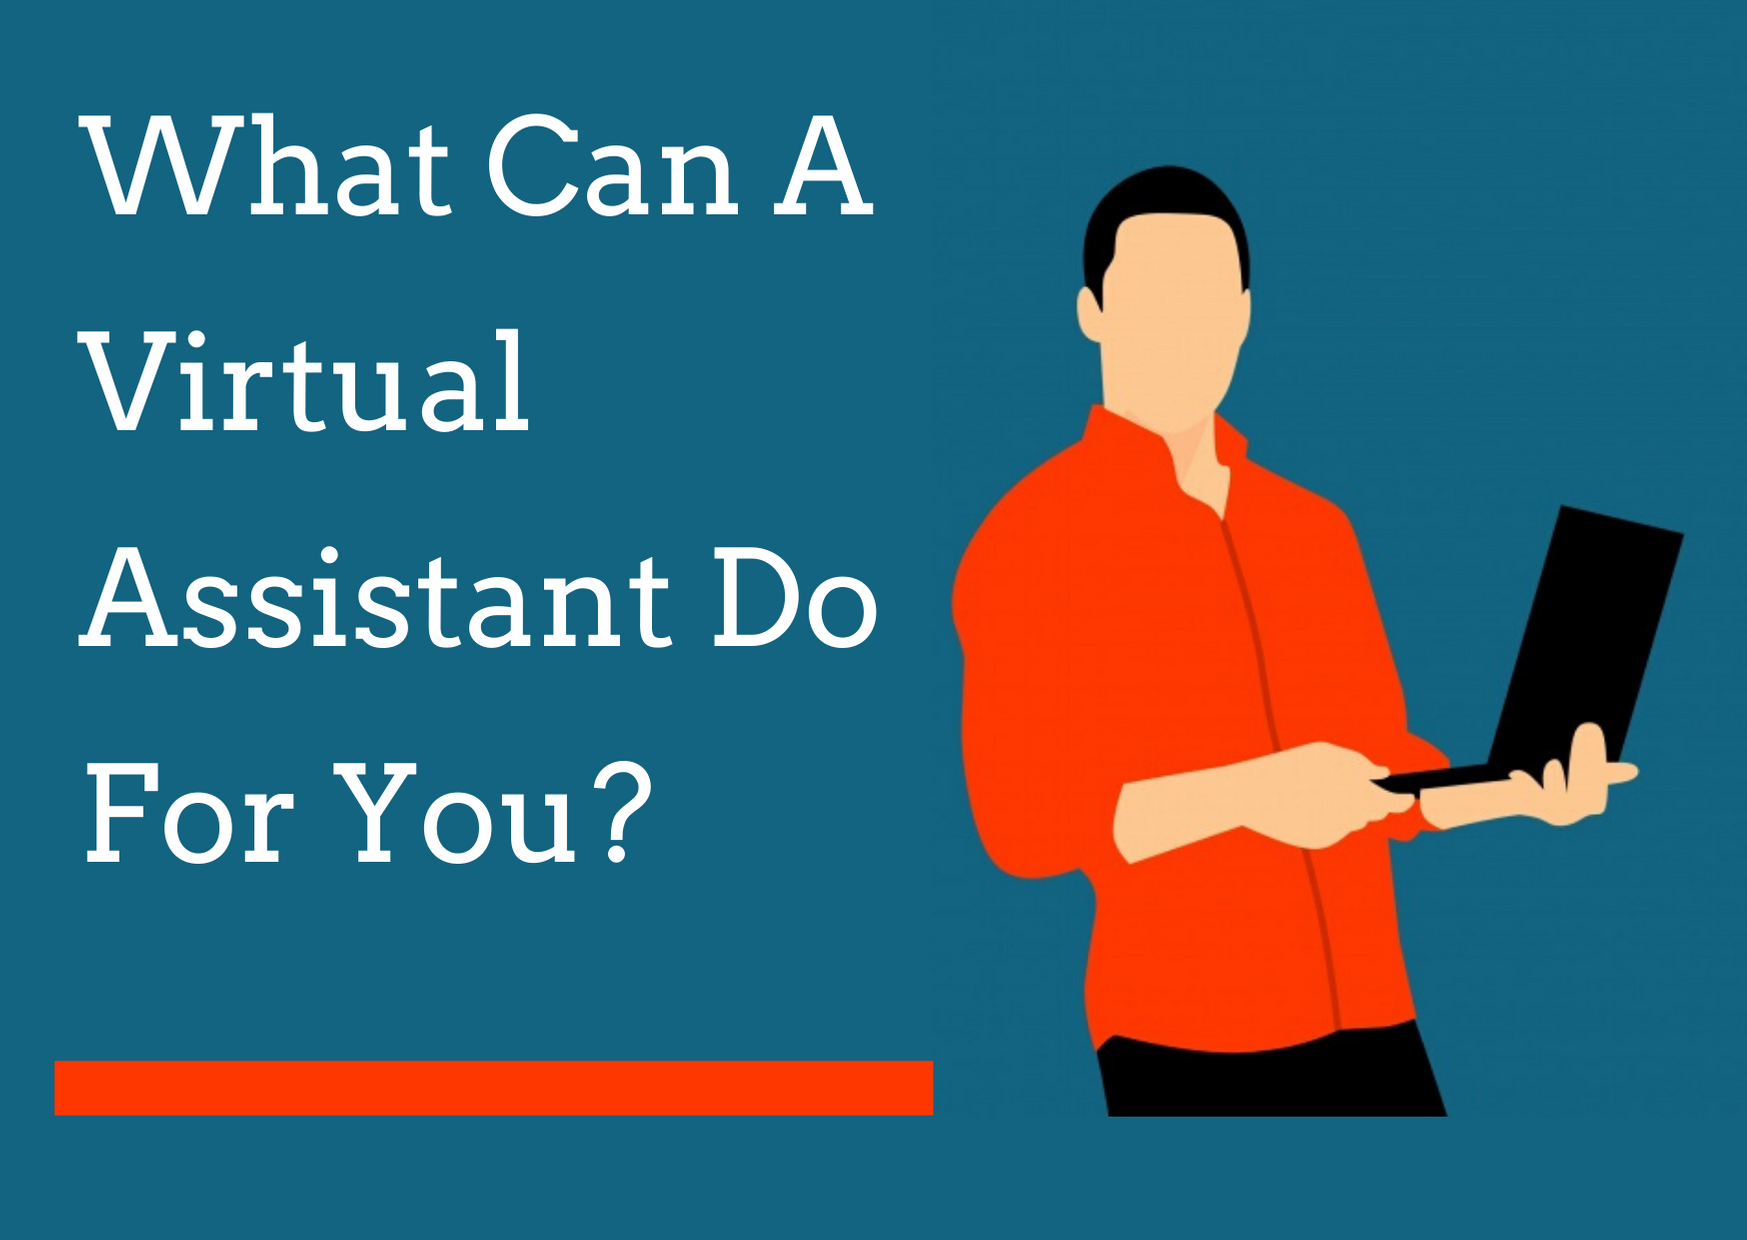 What Can a Virtual Assistant Do for you?